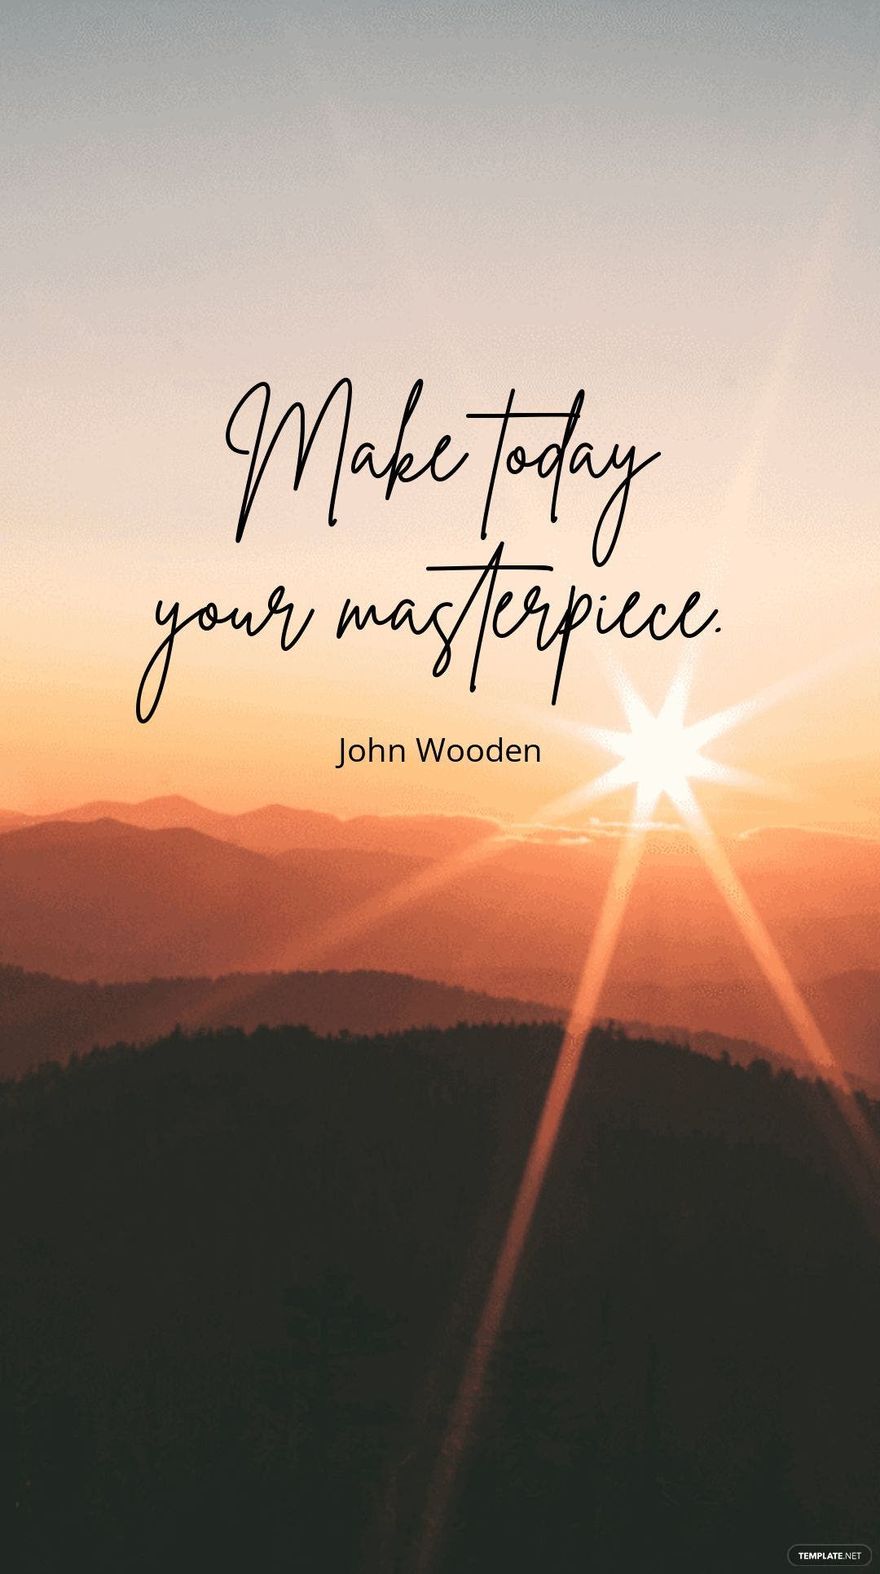 John Wooden - Make today your masterpiece.